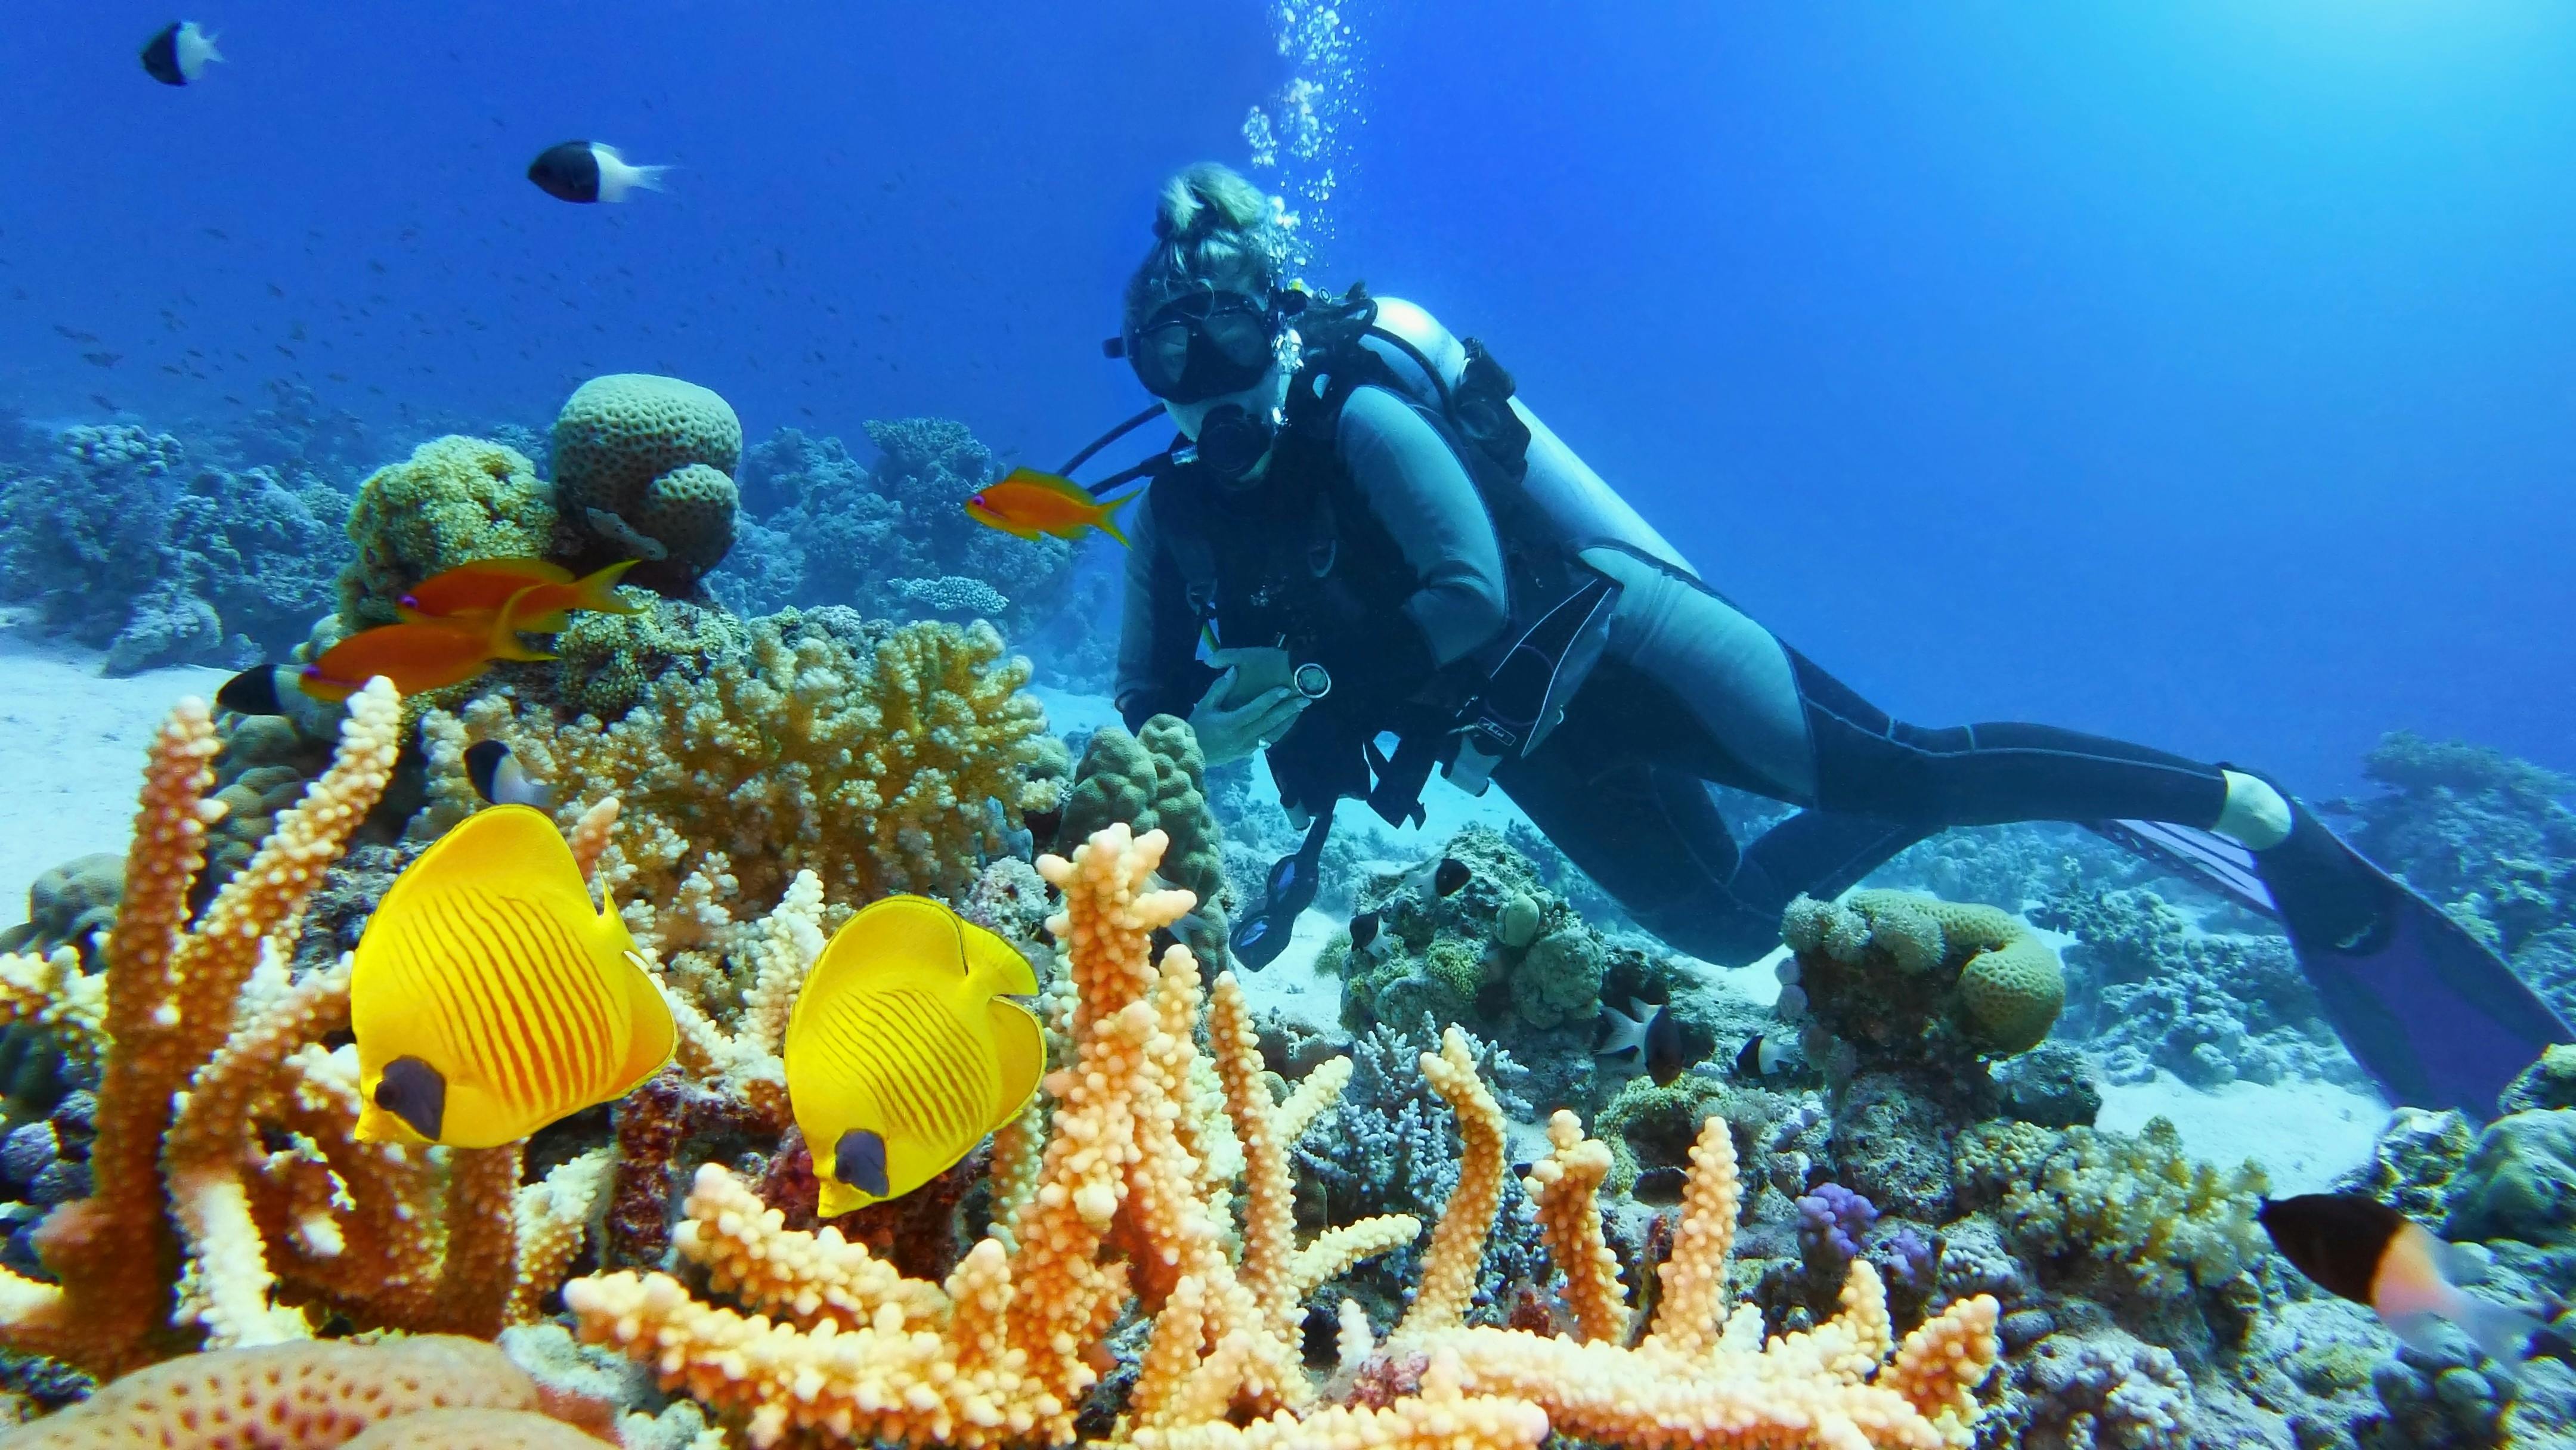 Full-day diving experience at the Great Barrier Reef with PADI guide Musement